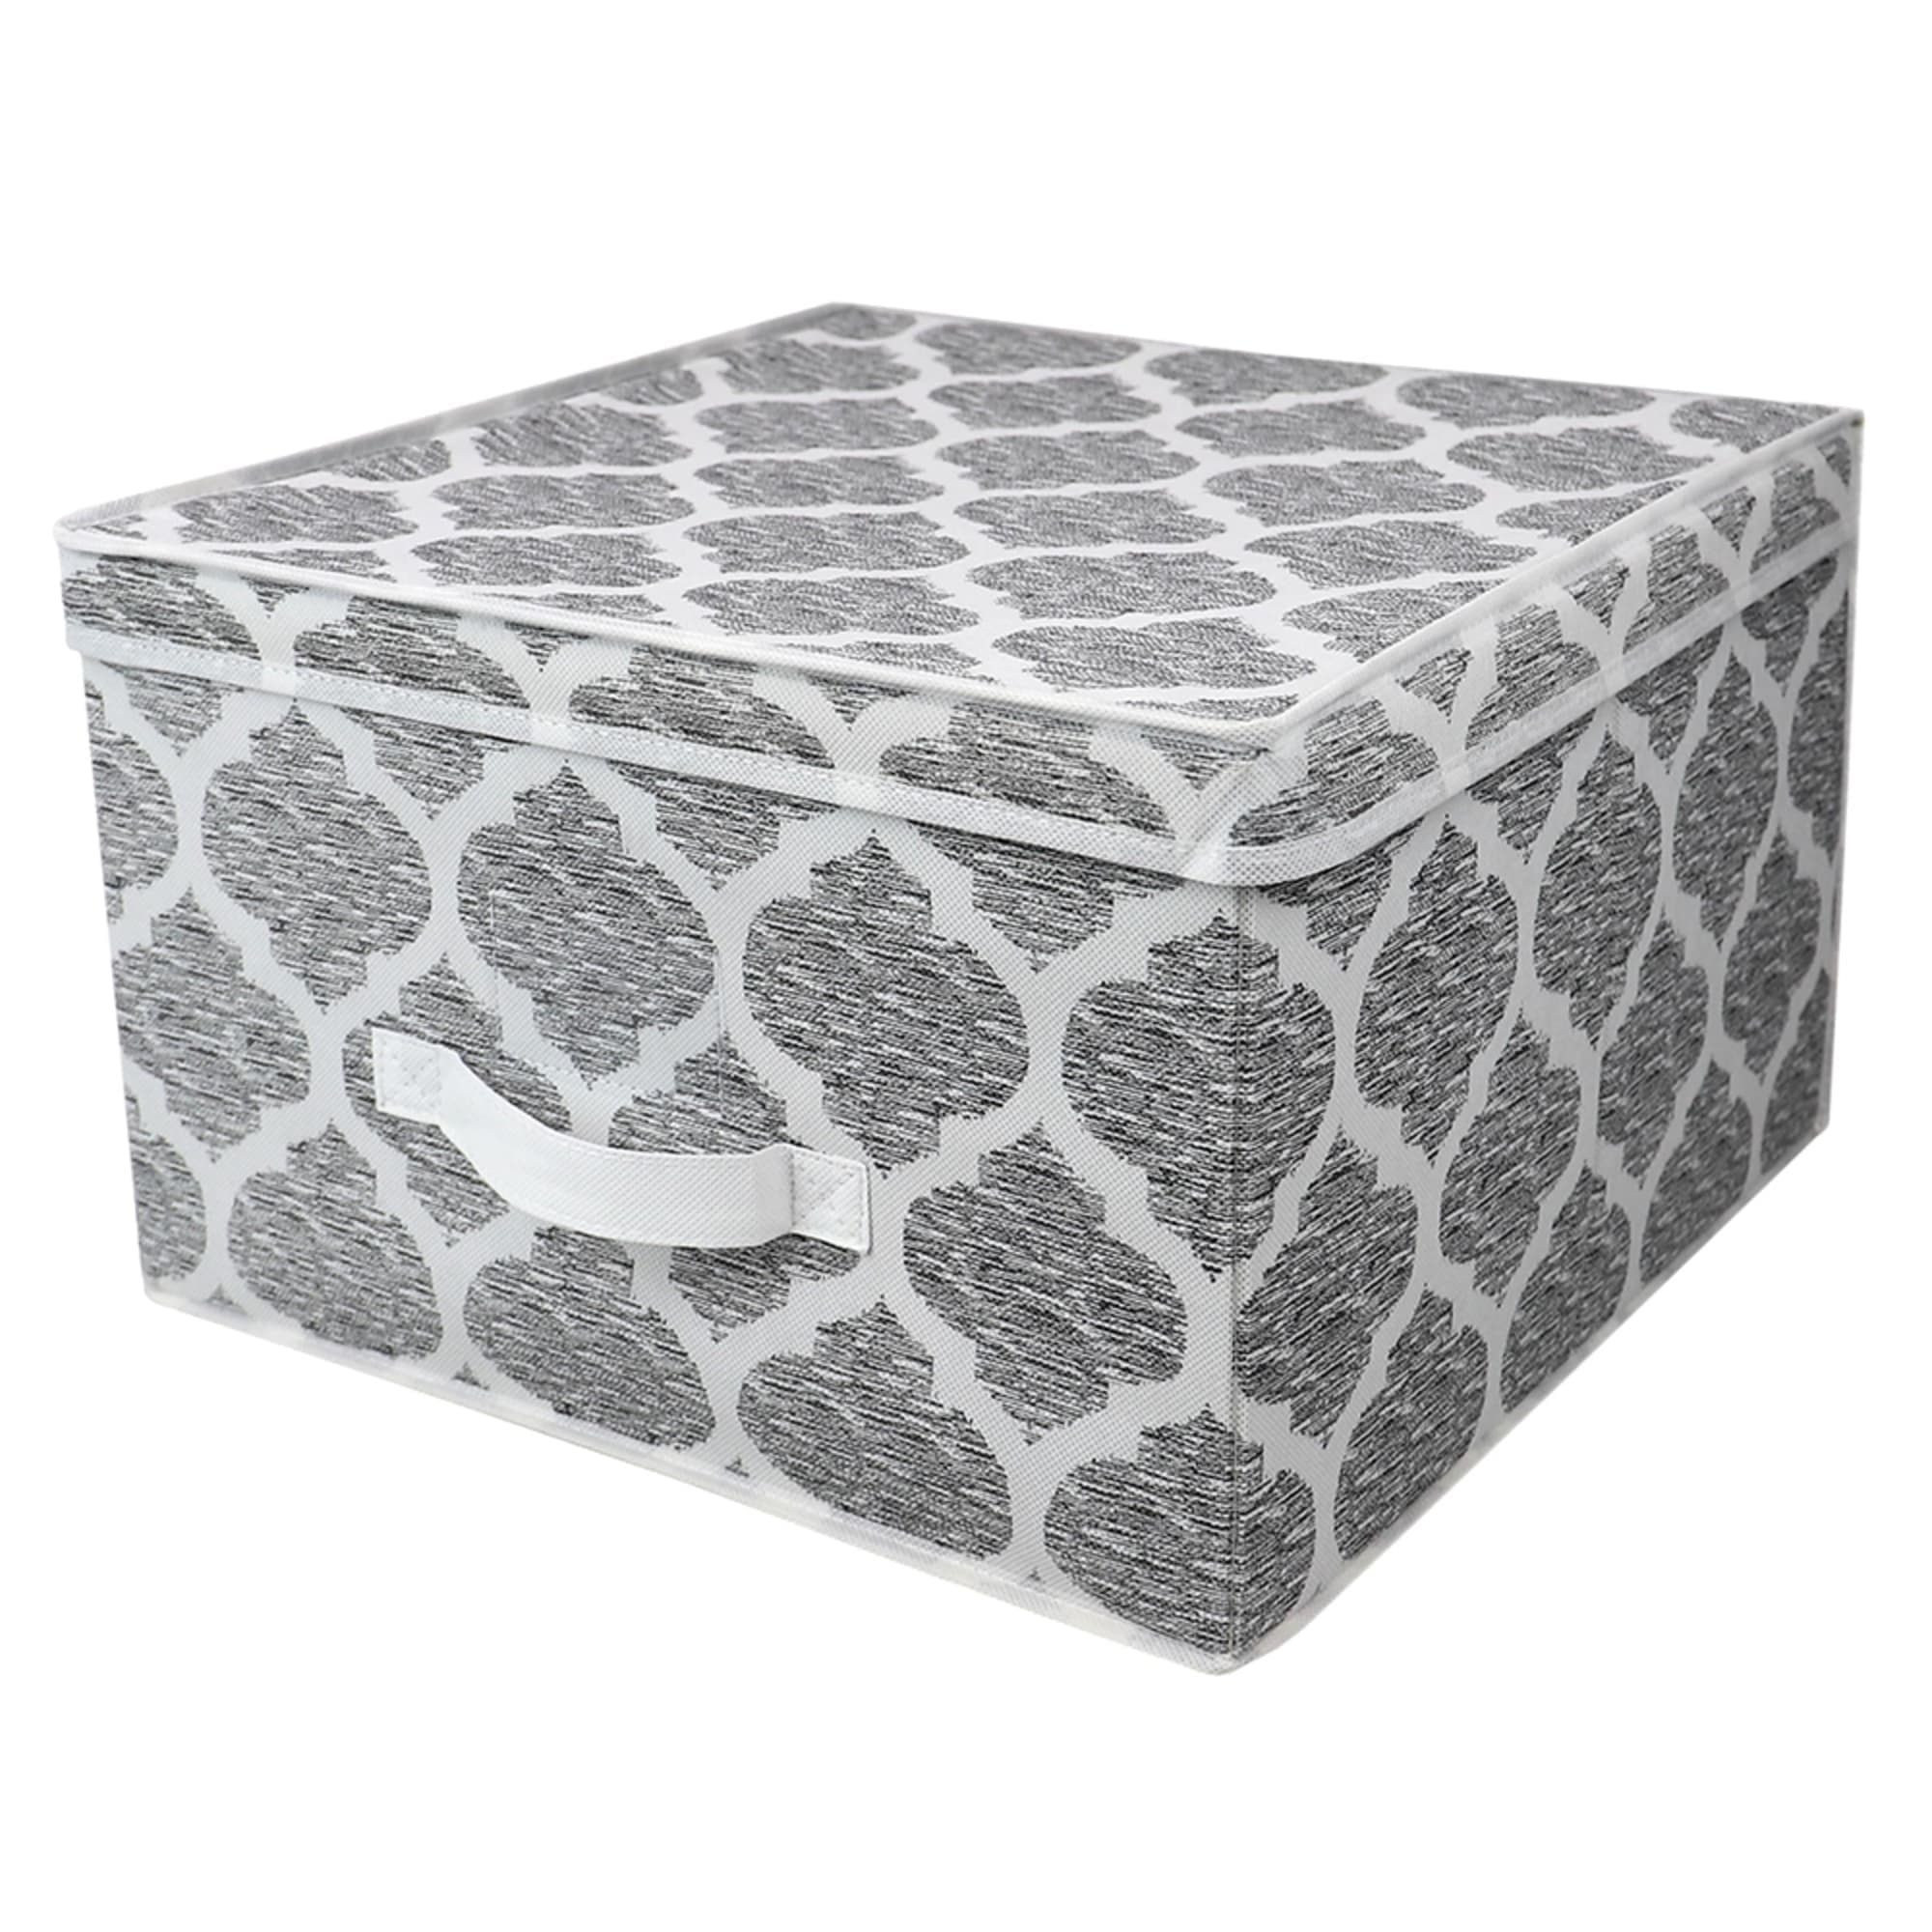 Home Basics Arabesque Jumbo Non-Woven Storage Box with Label Window, Grey $6.00 EACH, CASE PACK OF 12